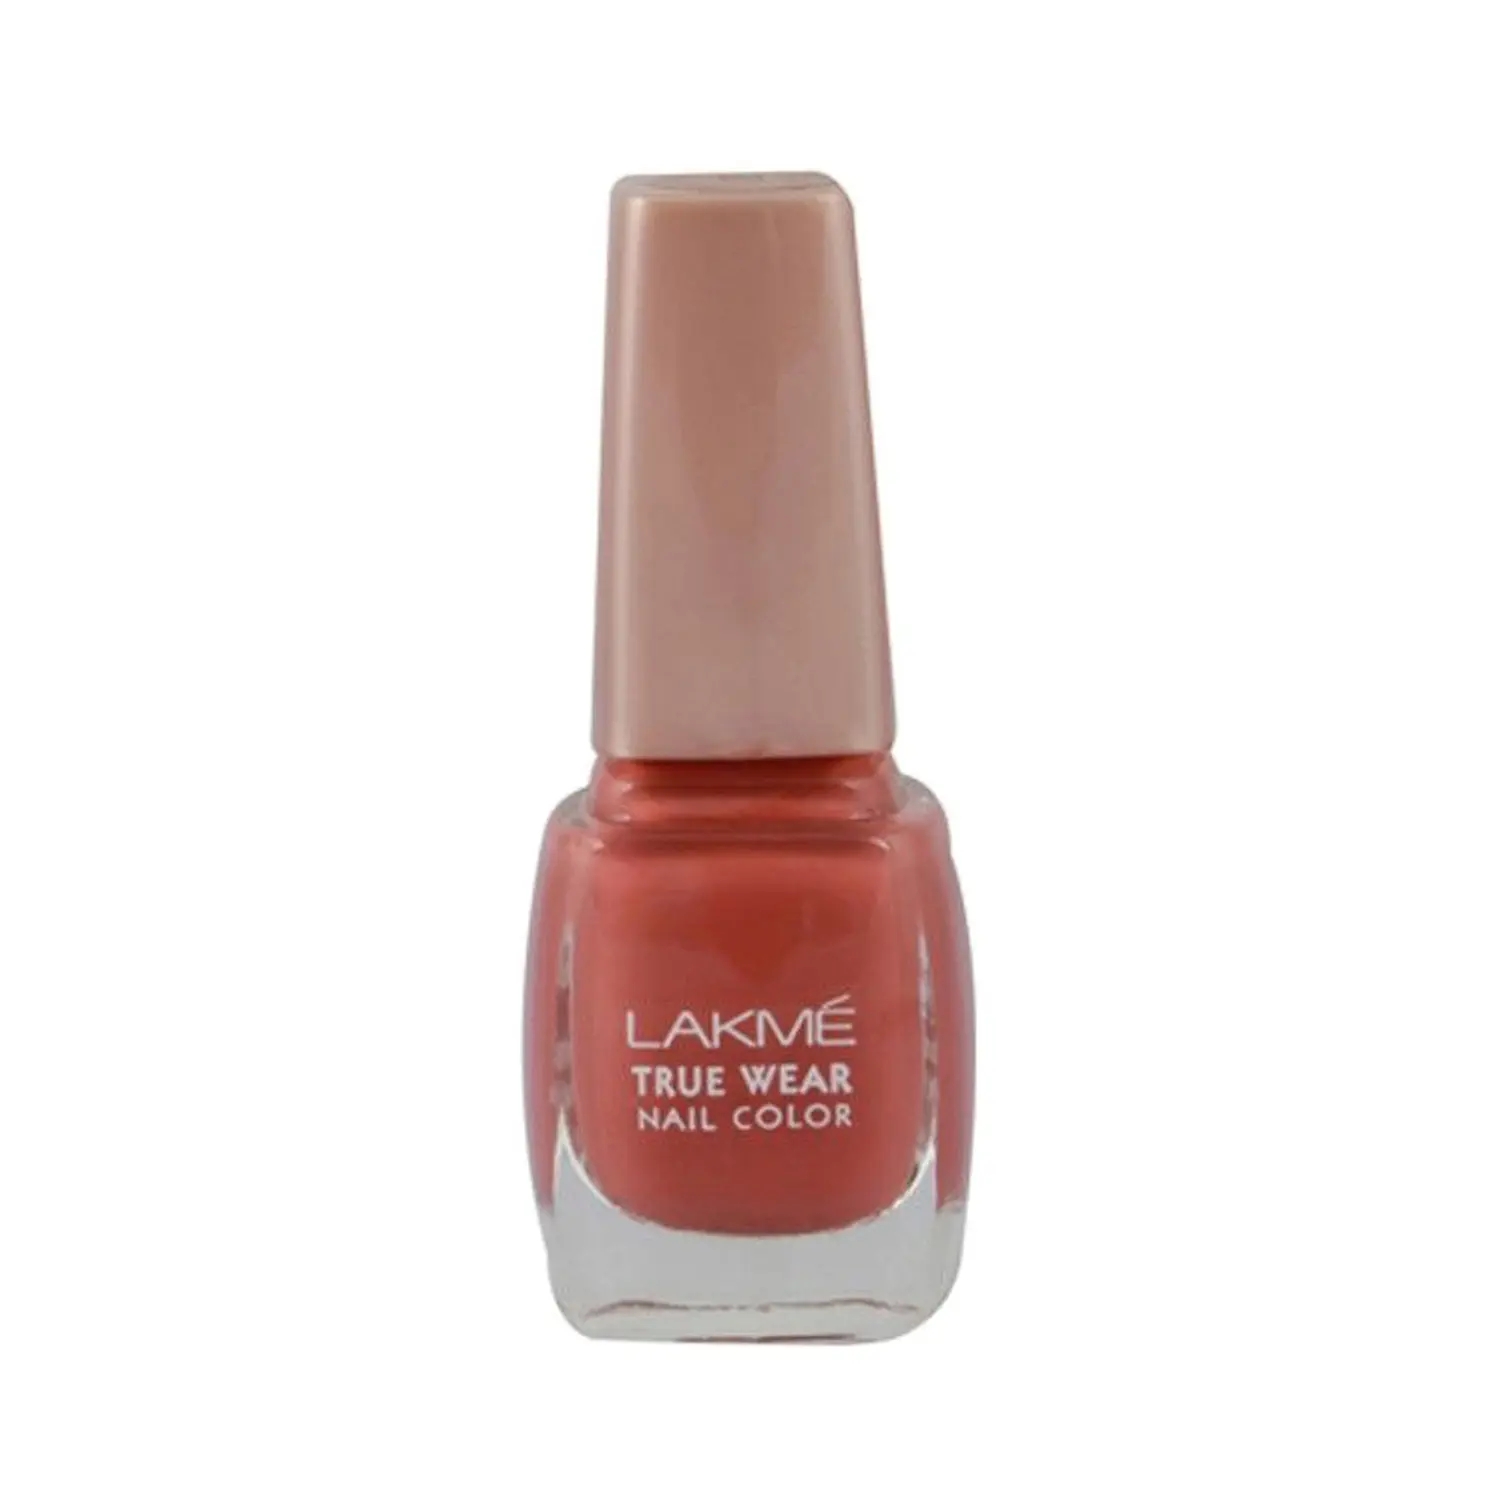 Buy Lakme True Wear Nail Color Shade 504 (9 ml) Online | Purplle